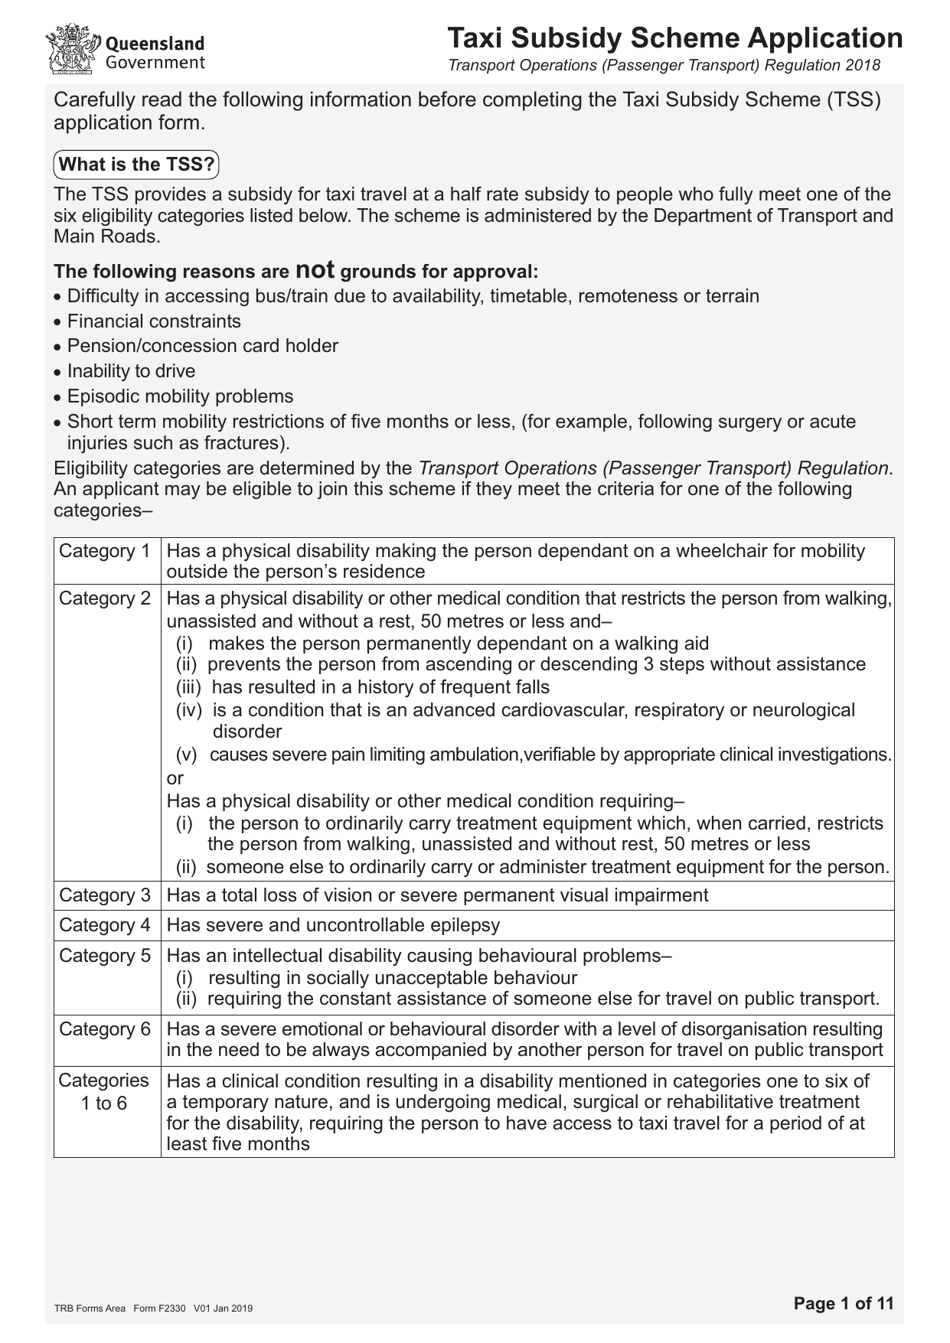 Form F2330 Taxi Subsidy Scheme Application - Queensland, Australia, Page 1